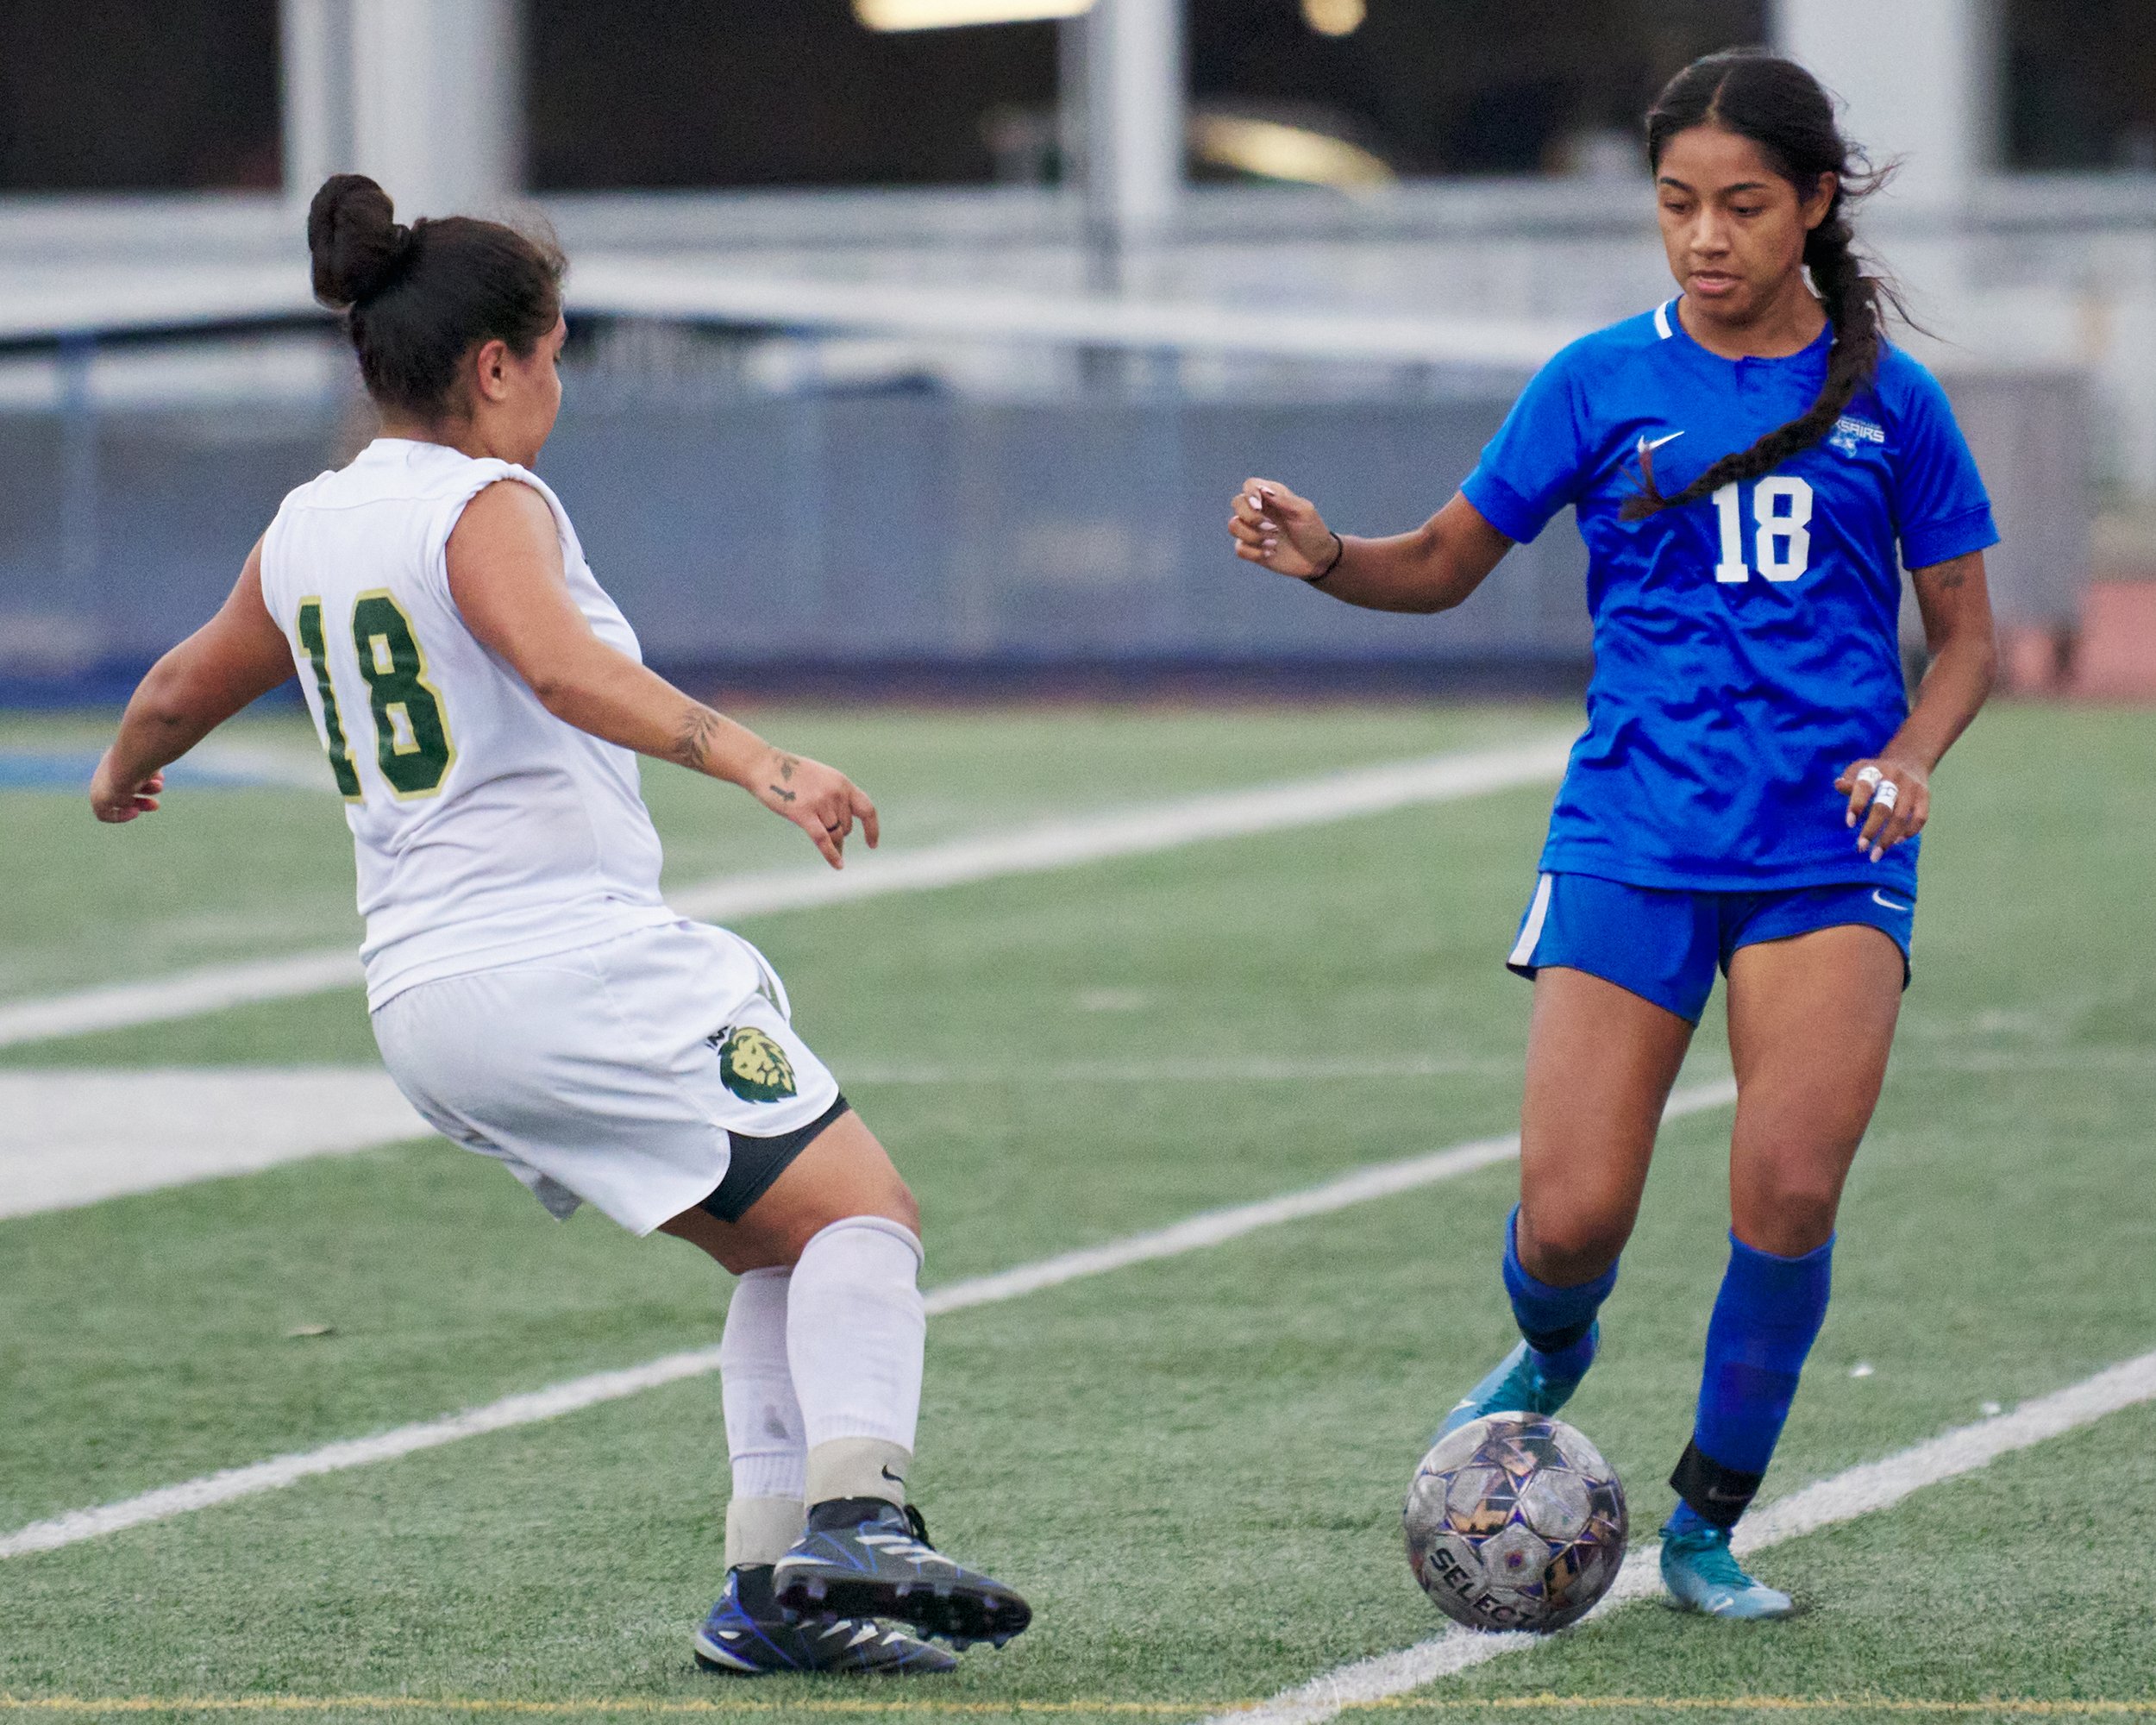  Los Angeles Valley College Monarchs' Angie Diaz and Santa Monica College Corsairs' Kaitlyn Romero during the women's soccer match on Tuesday, Nov. 1, 2022, at Corsair Field in Santa Monica, Calif. The Corsairs won 2-1. (Nicholas McCall | The Corsair